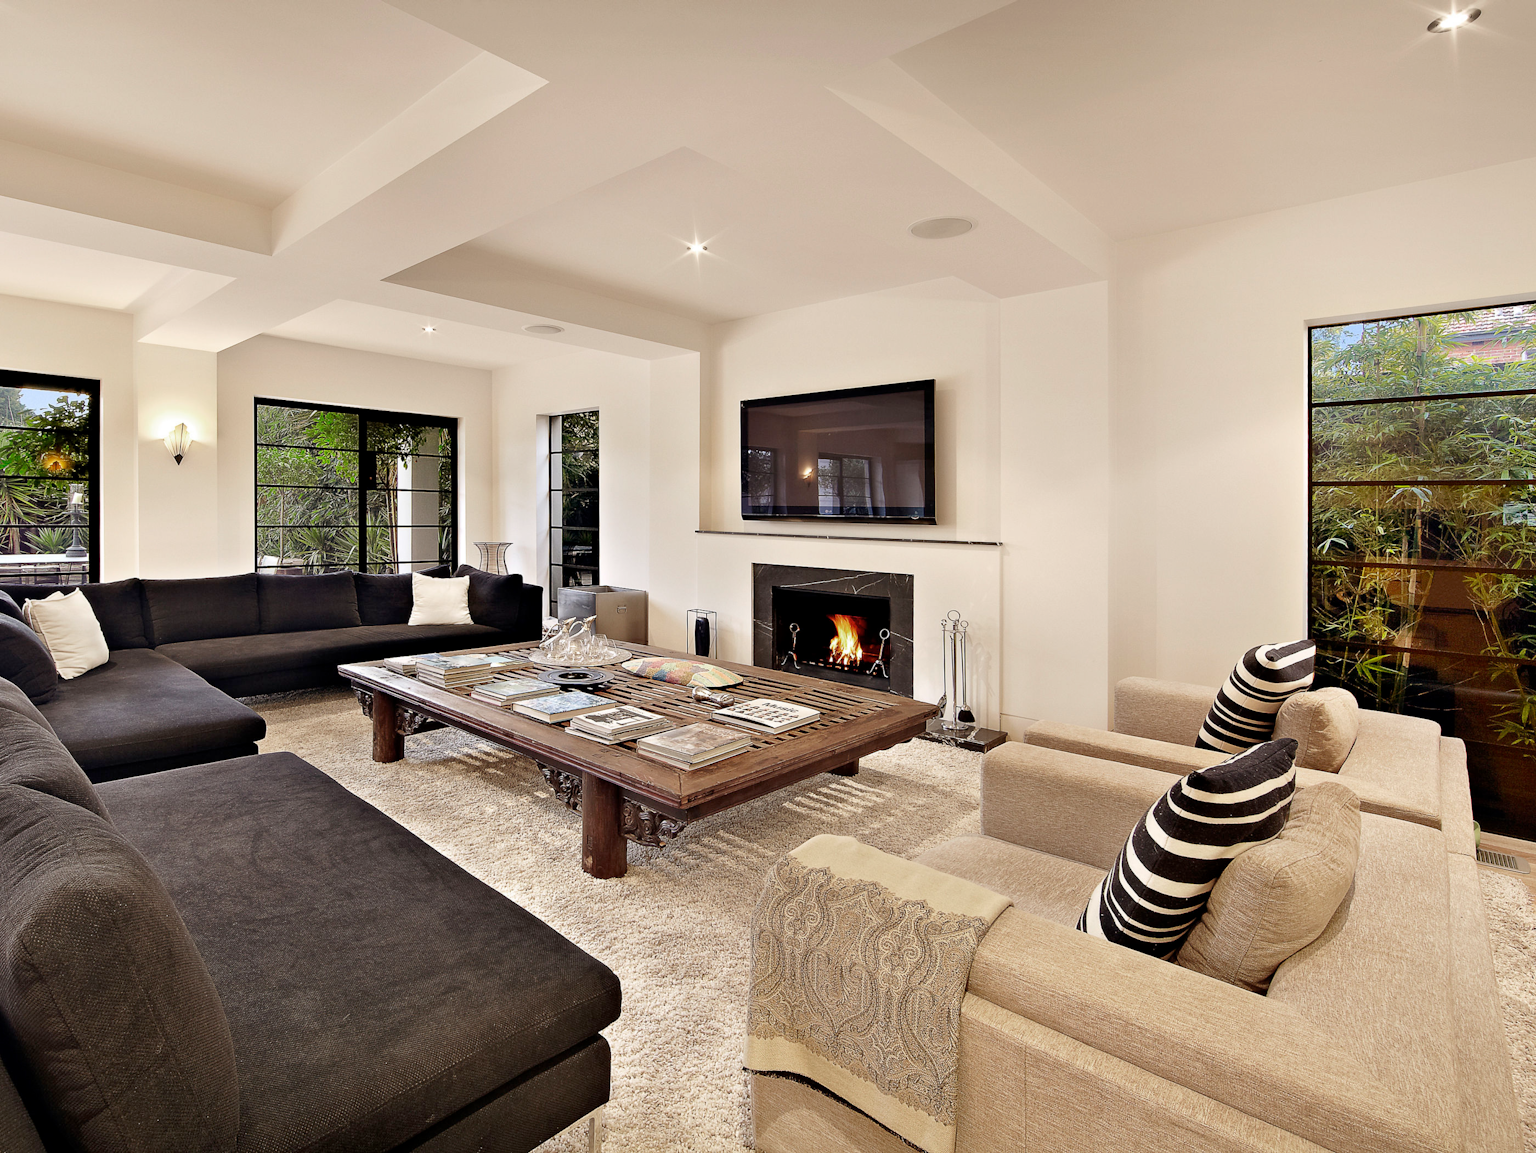 Interior shot with sofas and fireplace